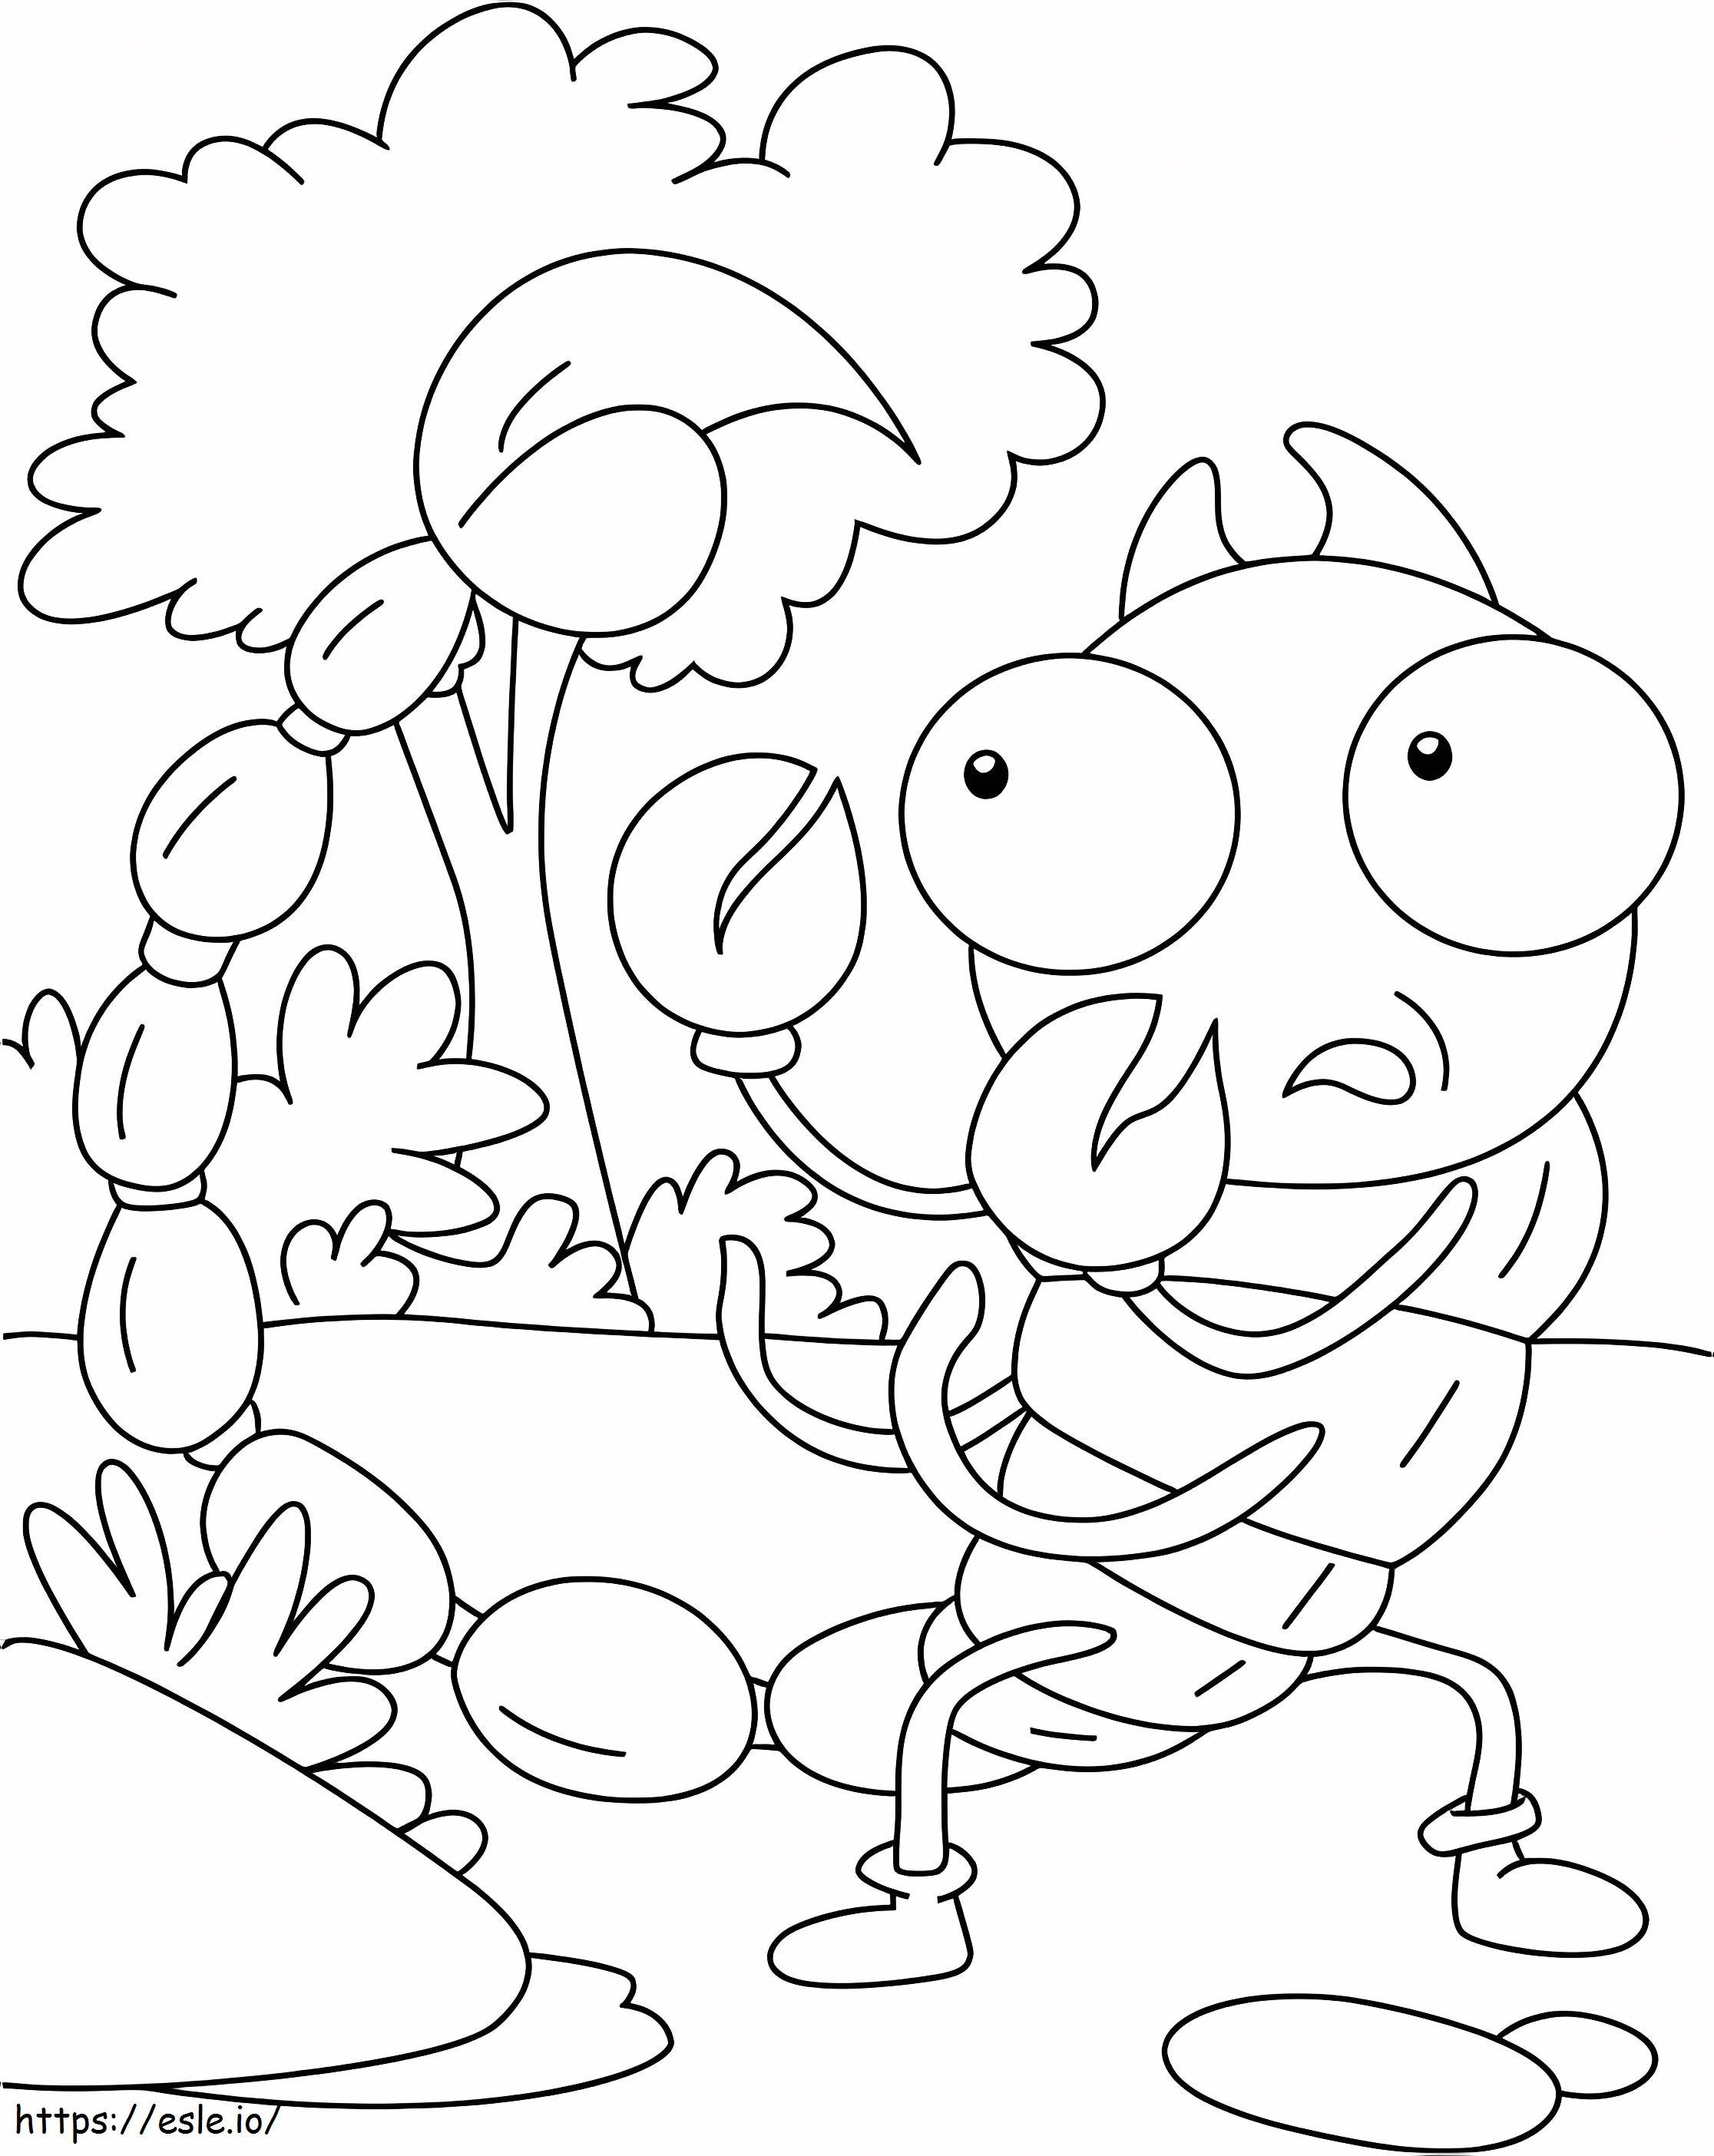 Animated Scorpion coloring page